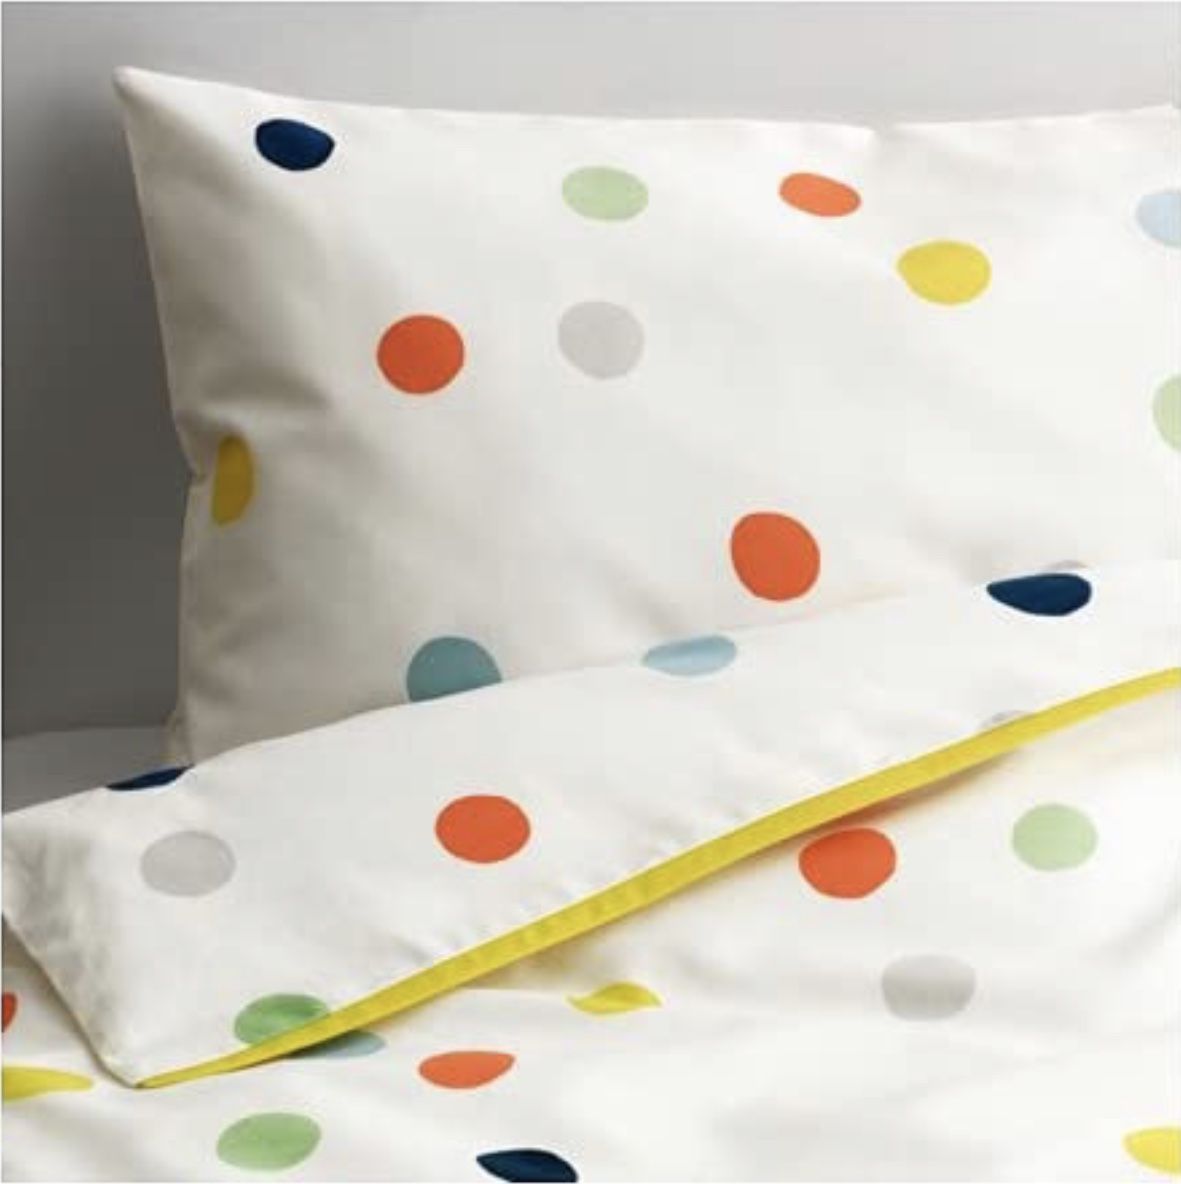 (2 beautiful cotton crib bedding +crib comforters and crib pillows 20$ 1 set)IKEA Crib Bedding Duvet Cover Set Includes One Duvet Cover and One Pil